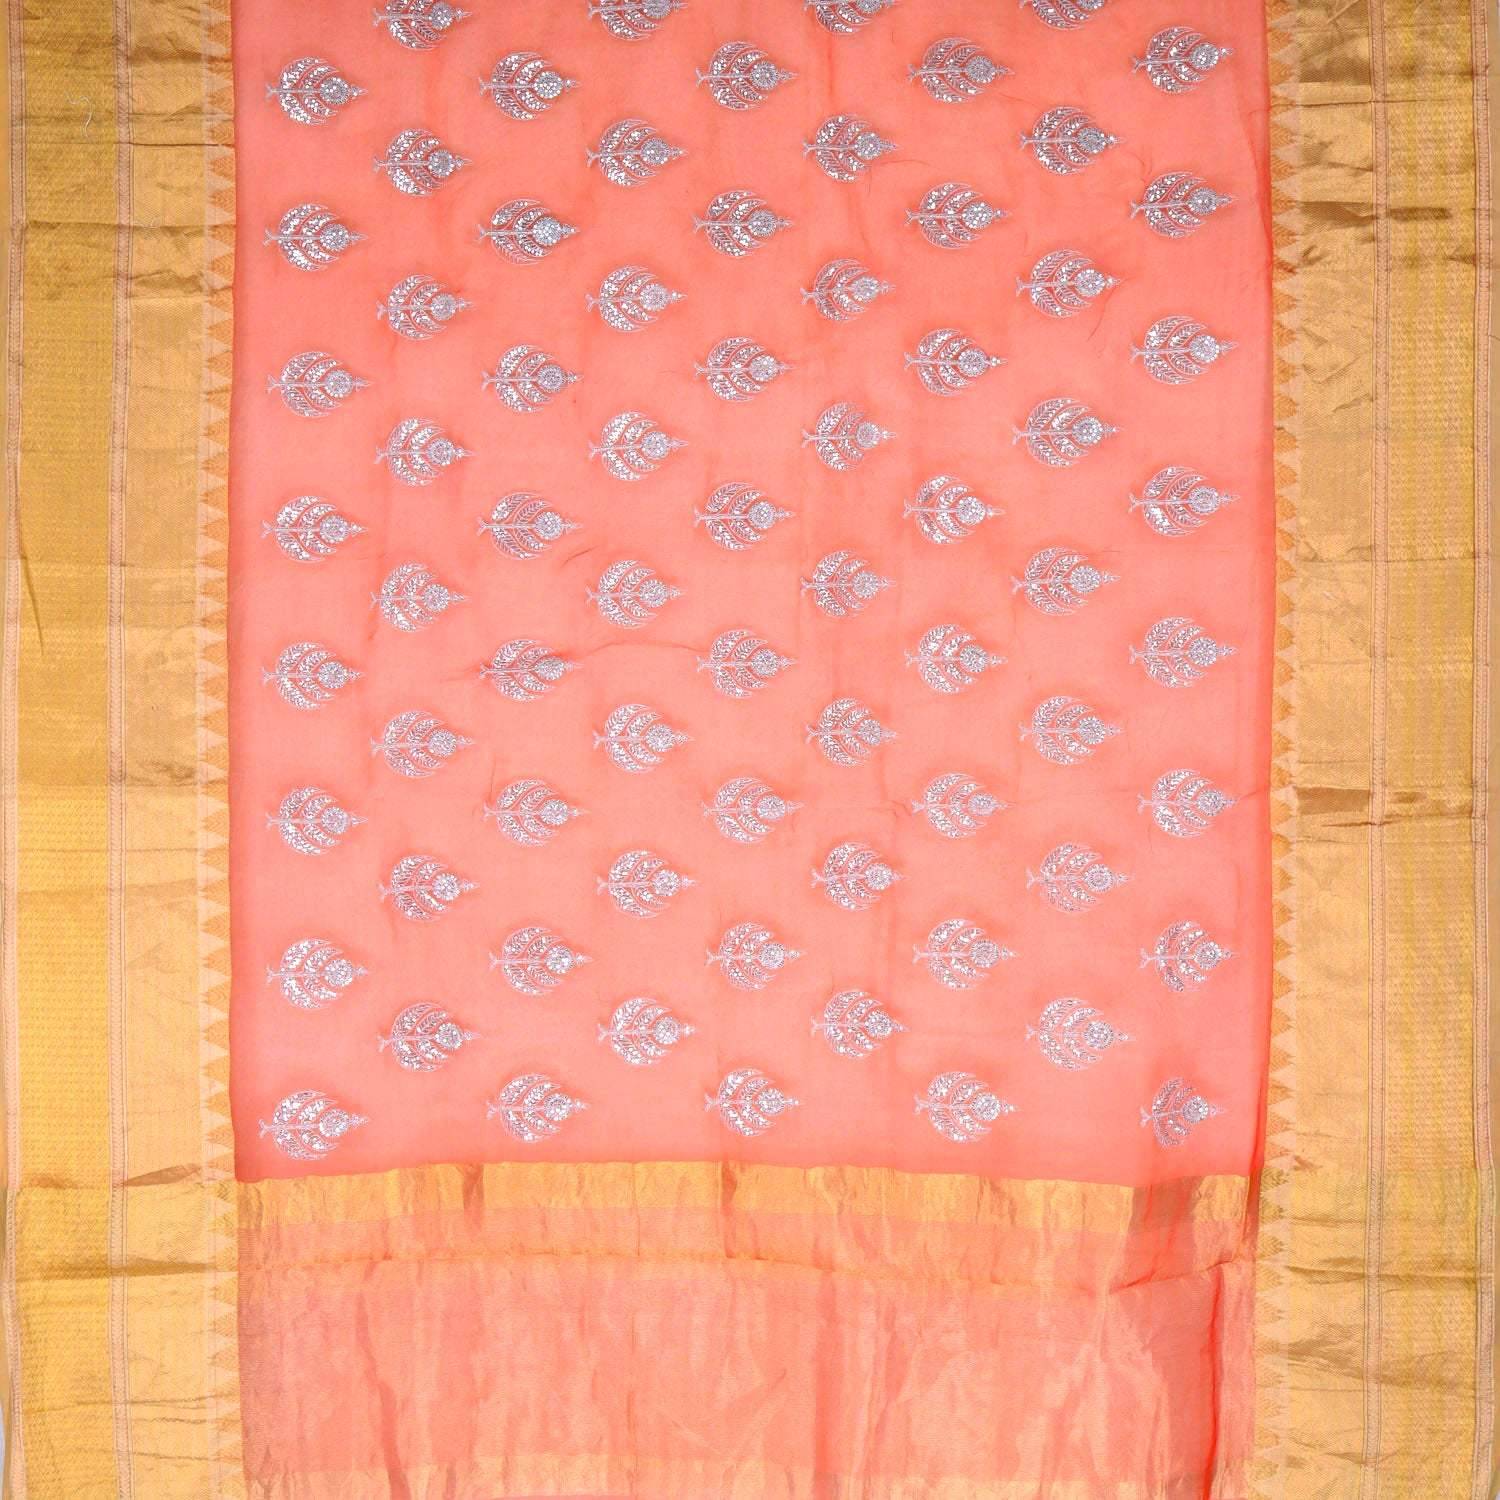 Orange Organza Saree With Embroidery Motifs - Singhania's